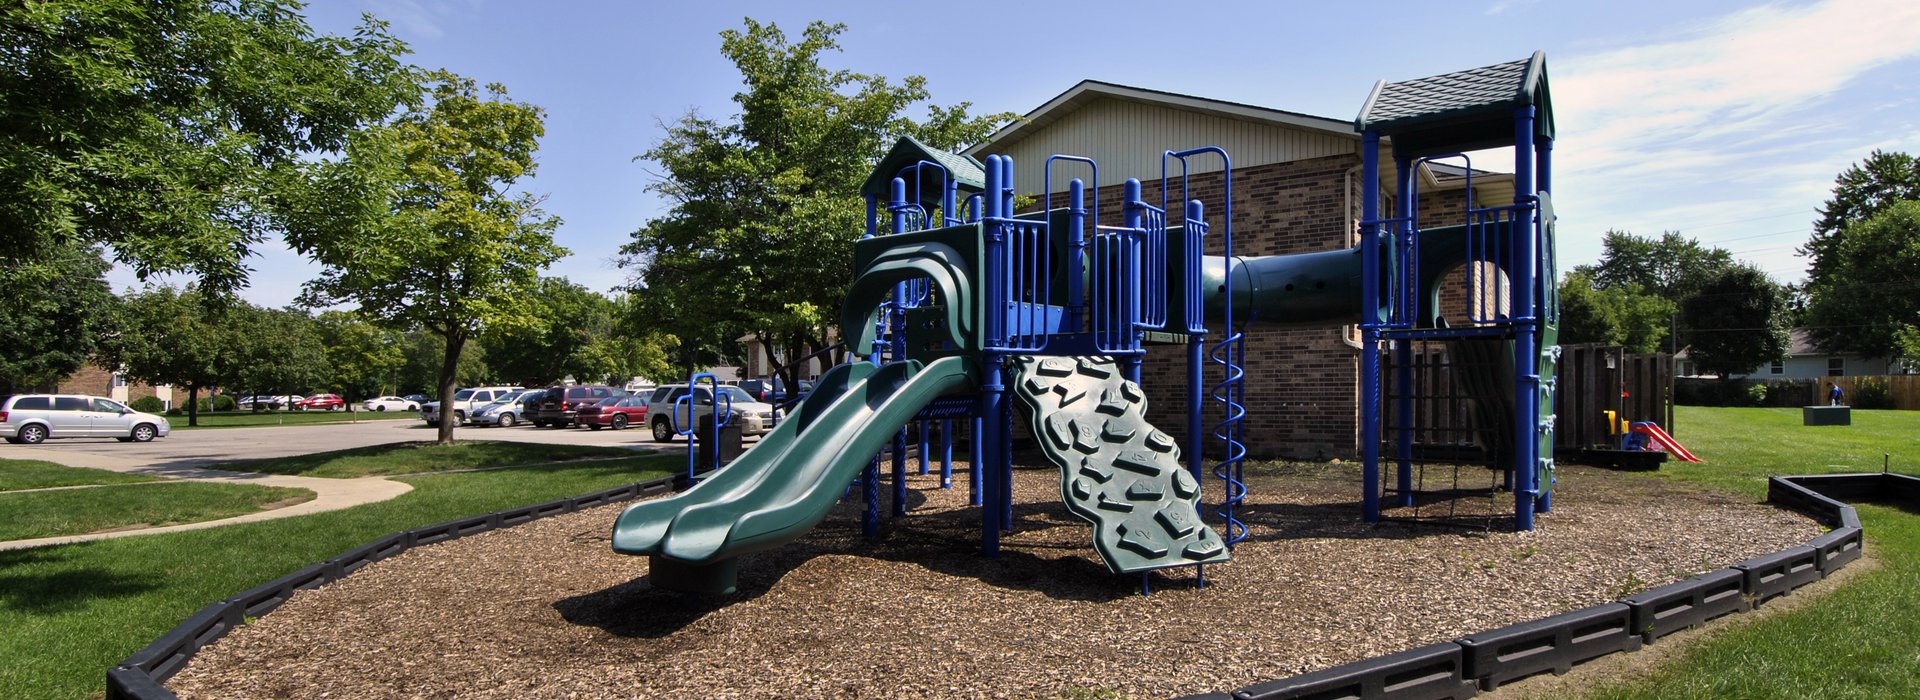 playground located at Blue water townhouses